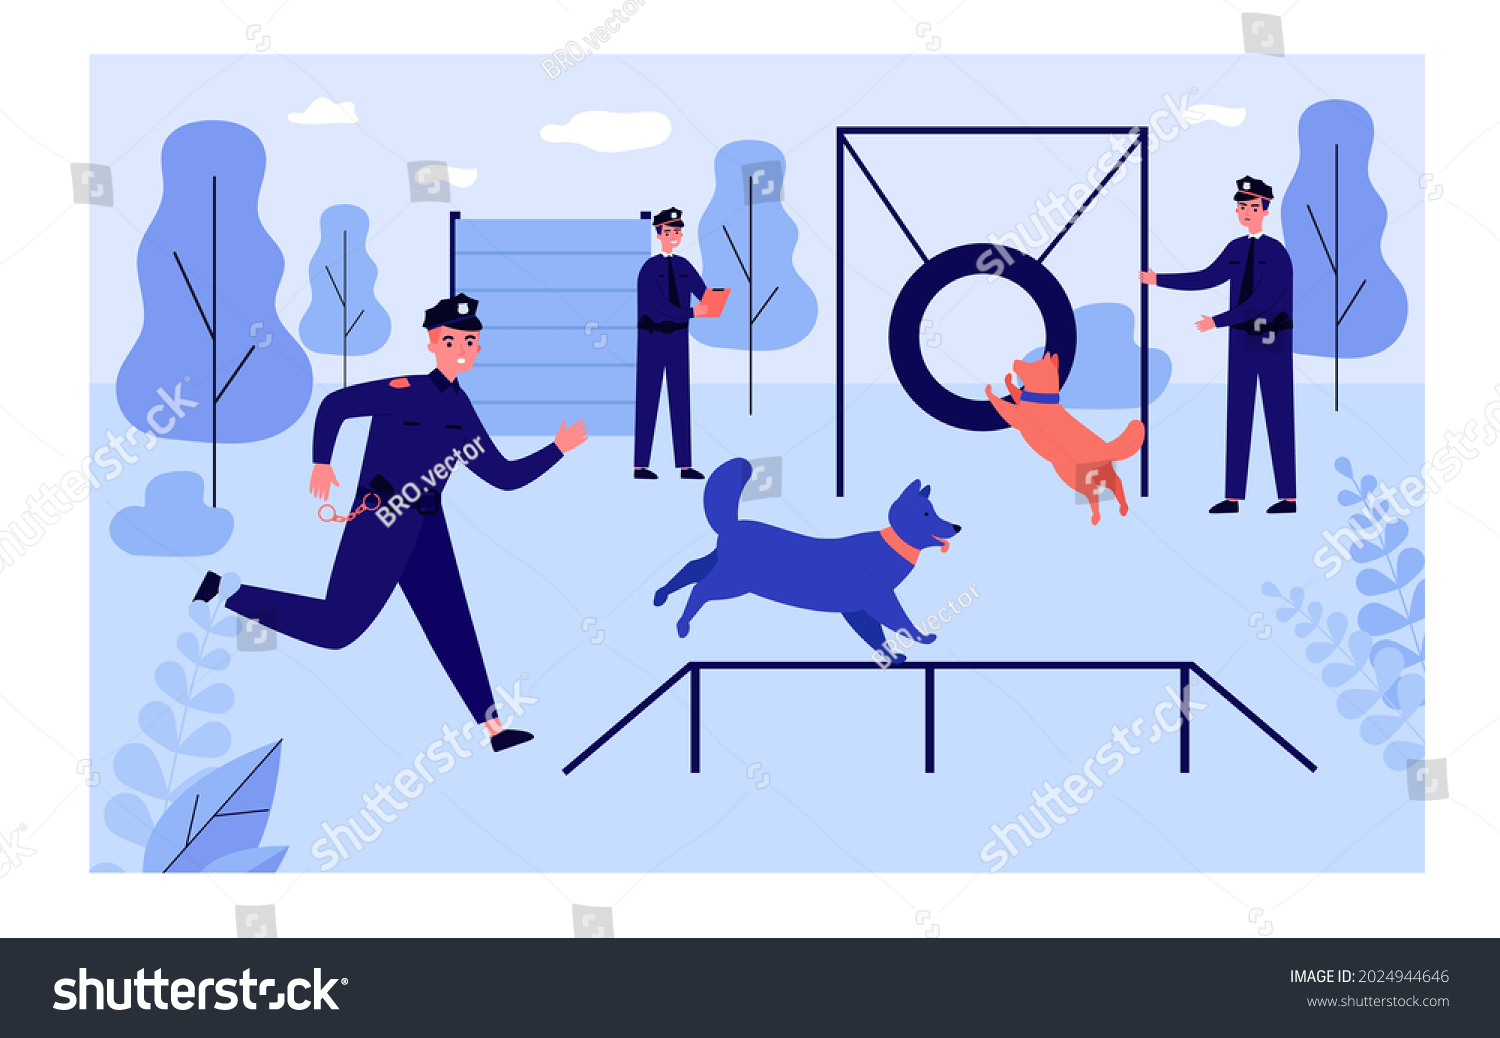 police obstacle training